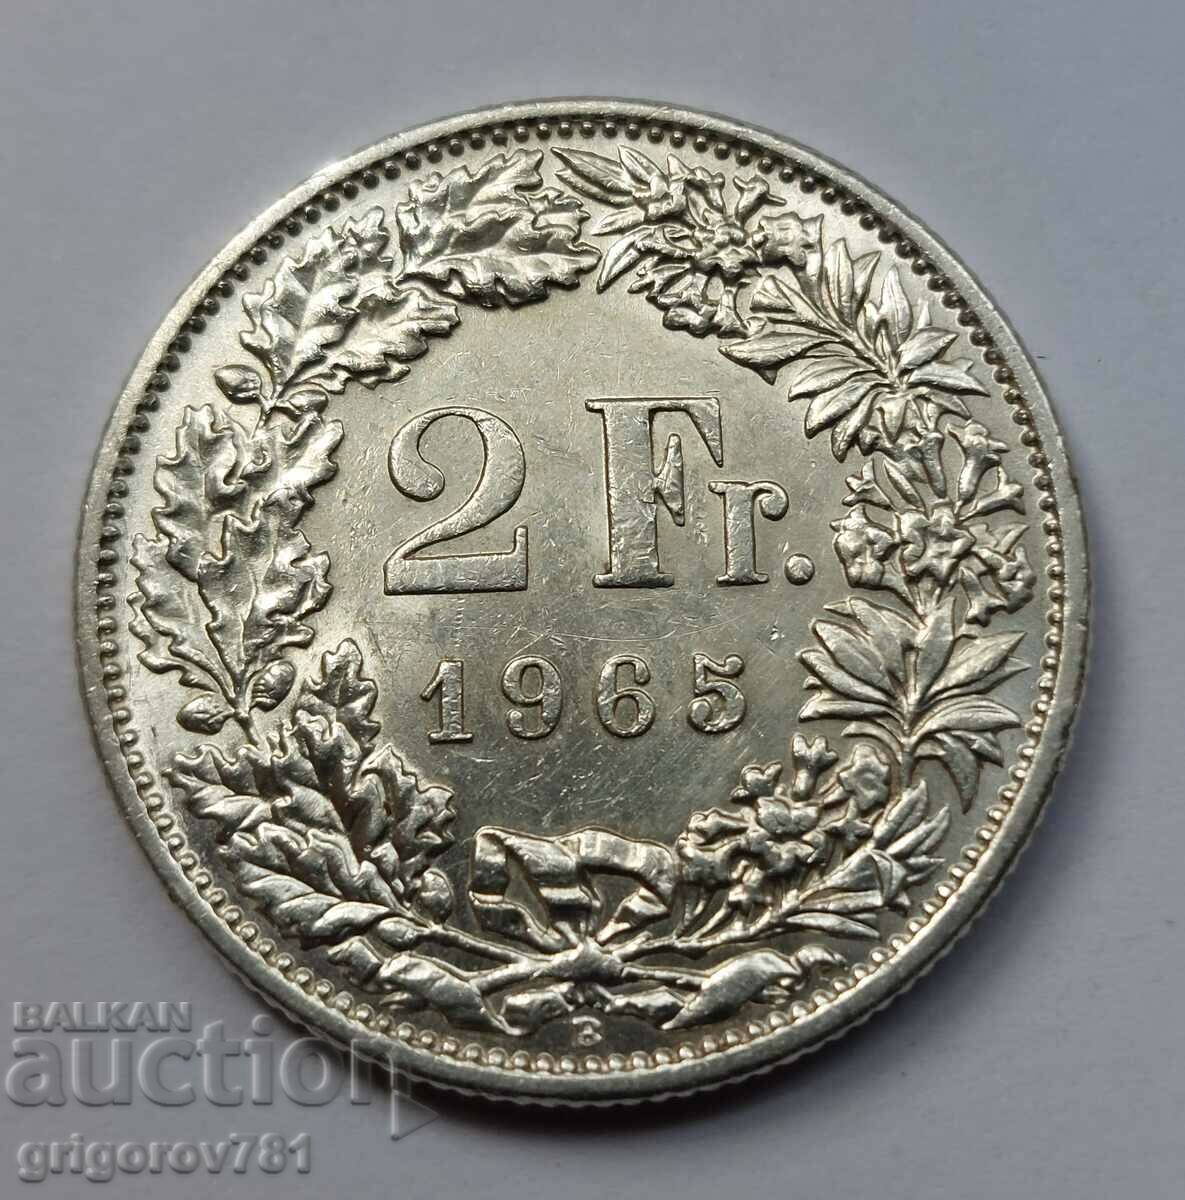 2 Francs Silver Switzerland 1965 B - Silver Coin #20